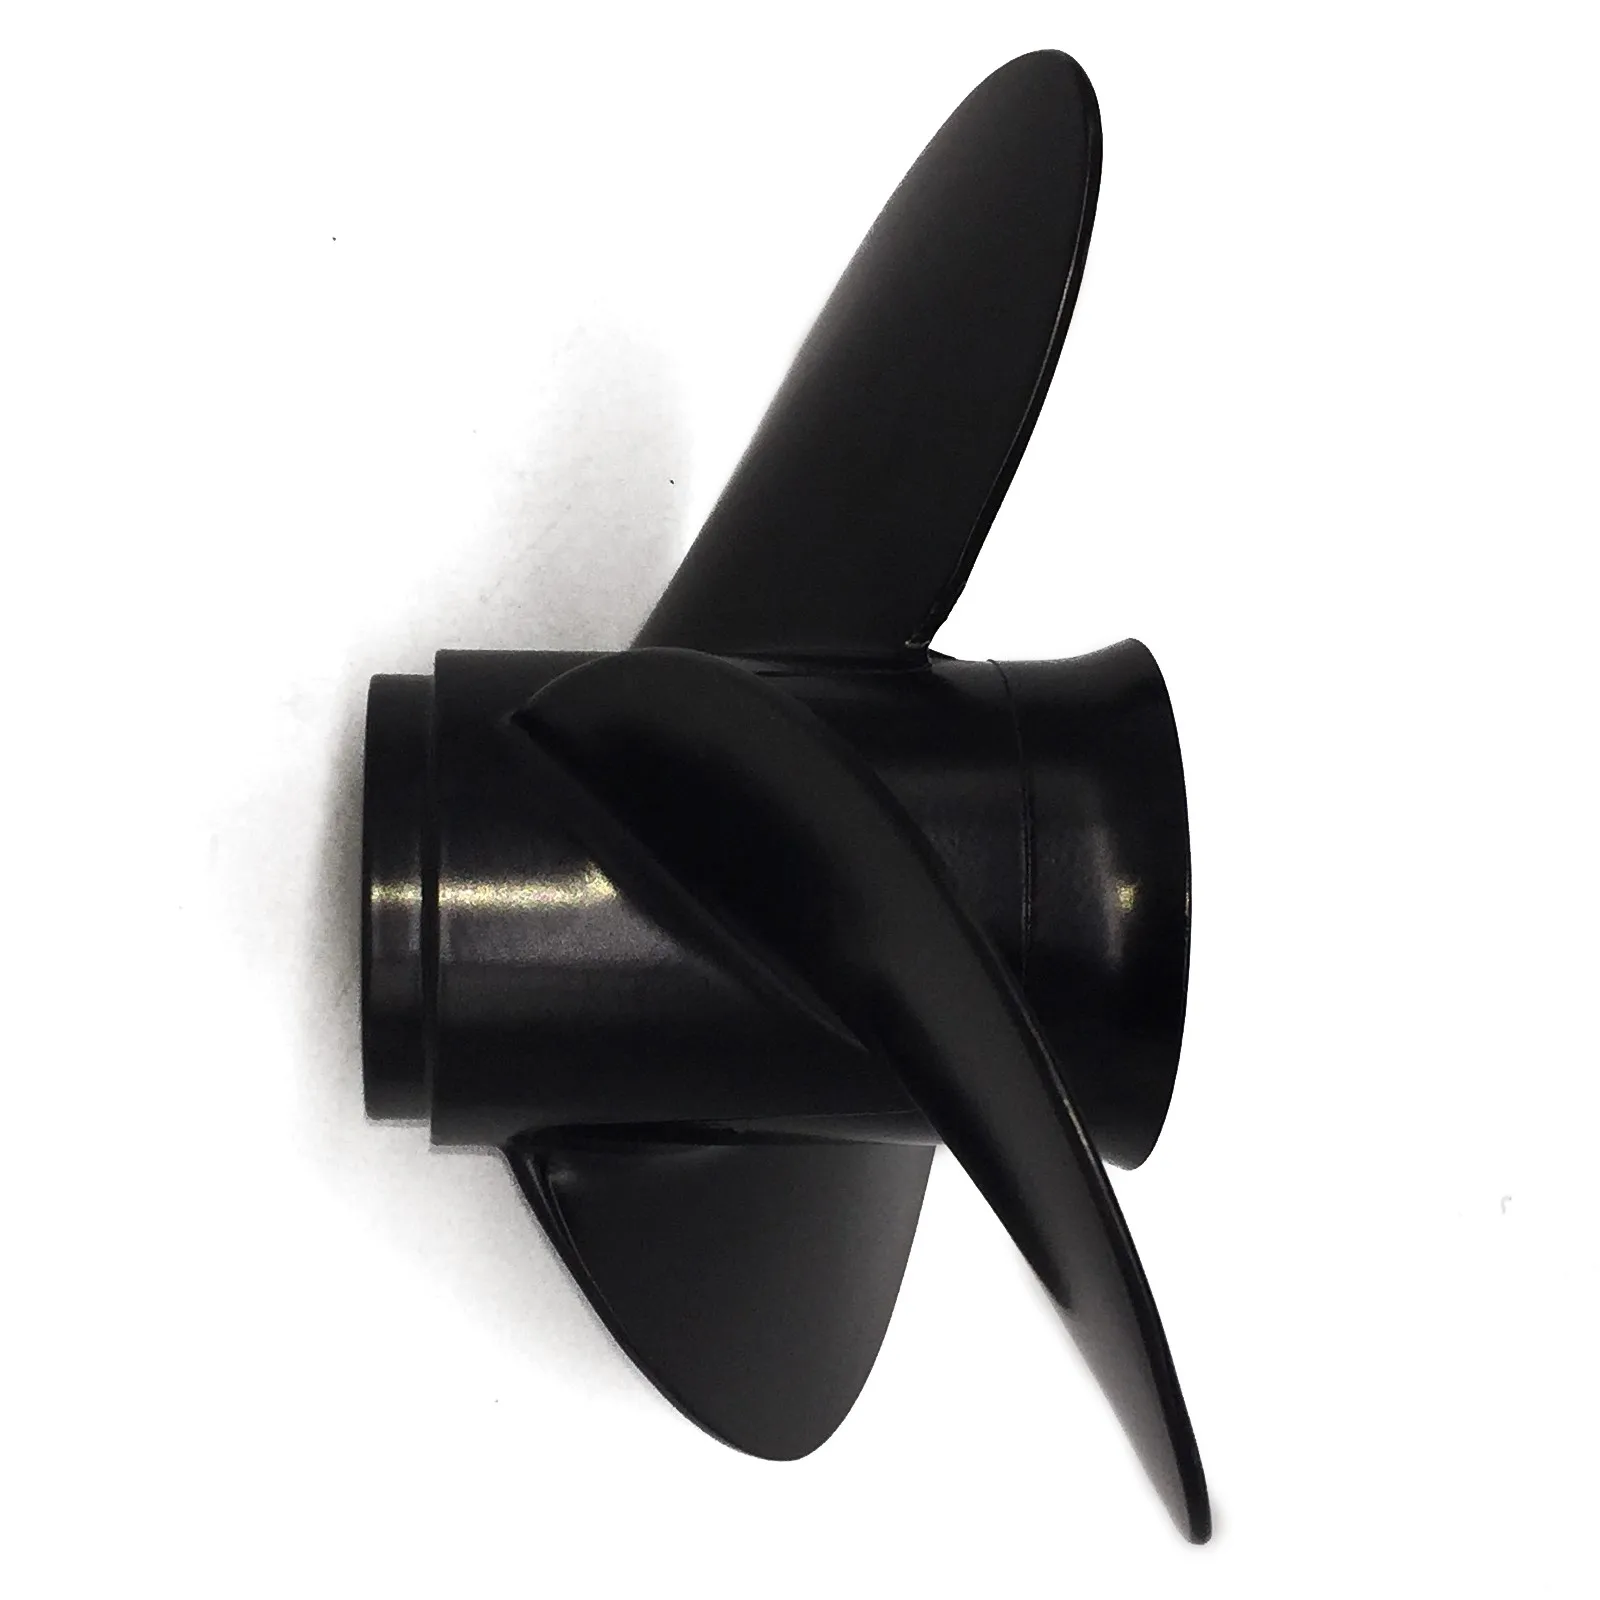 Boat Propeller 8.9x8.5 Fit for Tohatsu Outboard 9.8HP-18HP 3 Blades Aluminum Prop 14 Tooth Propel RH OEM NO: 3B2W64517-1 8.9x8.5